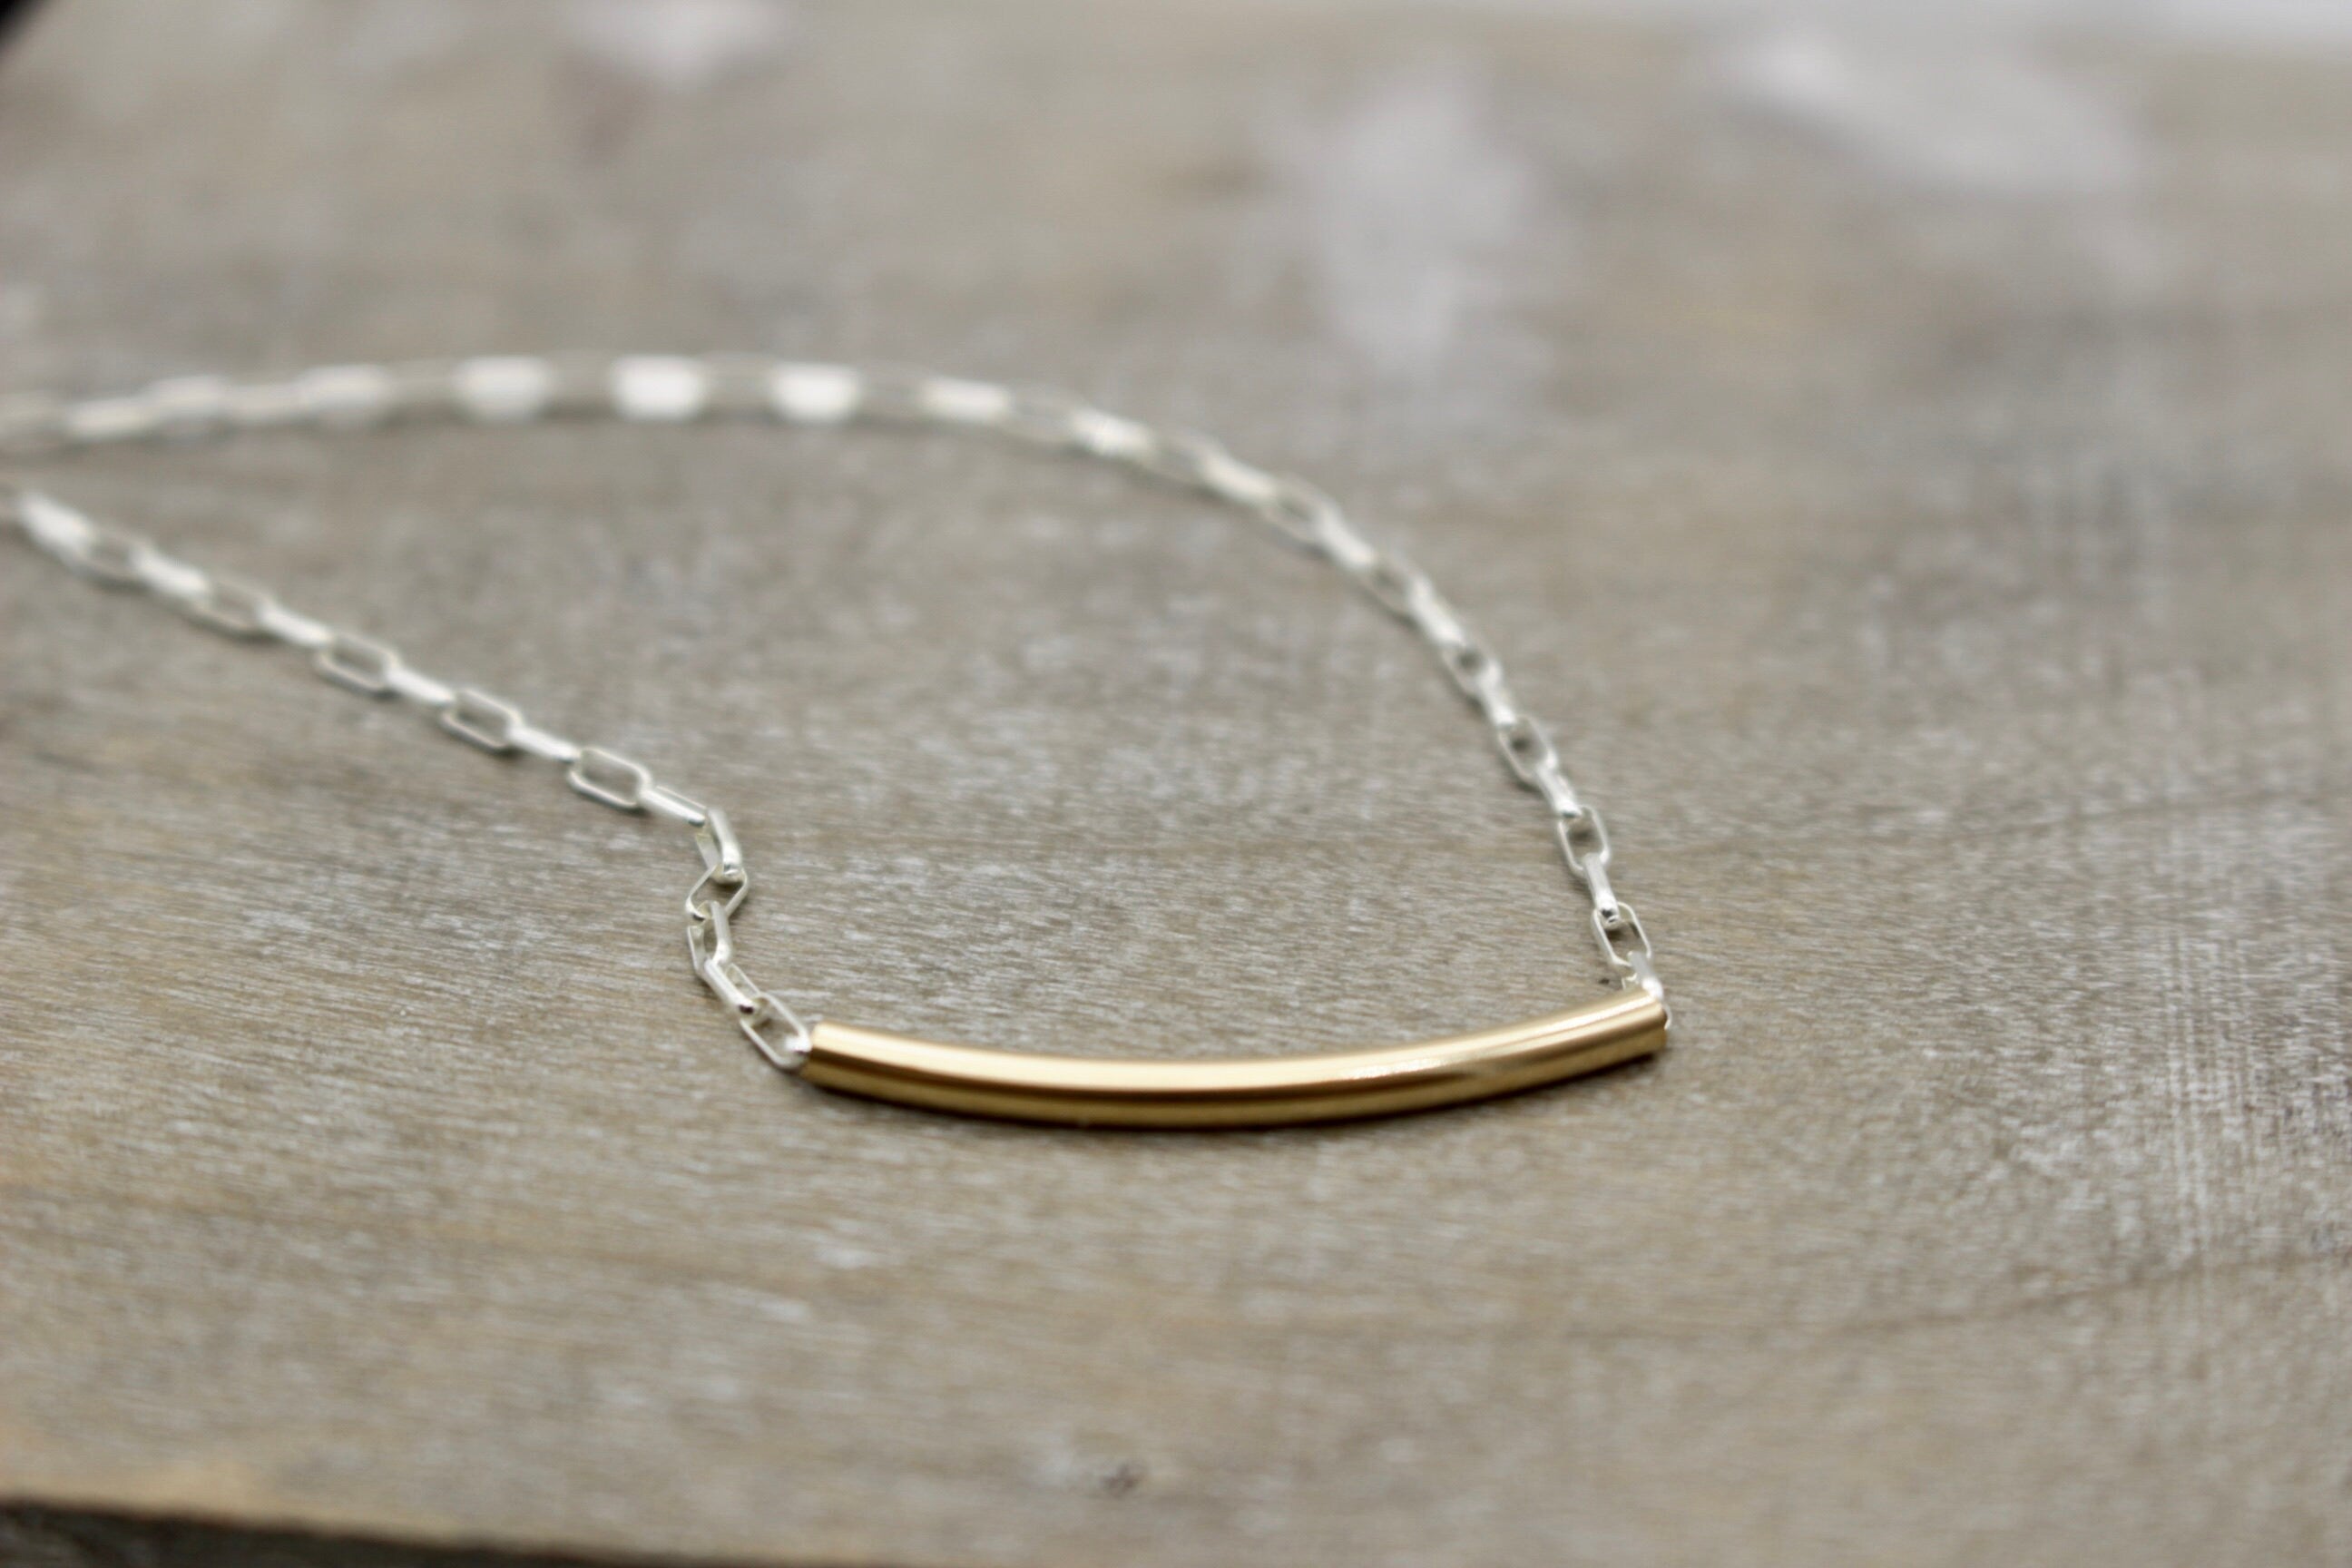 Gold and silver tube necklace